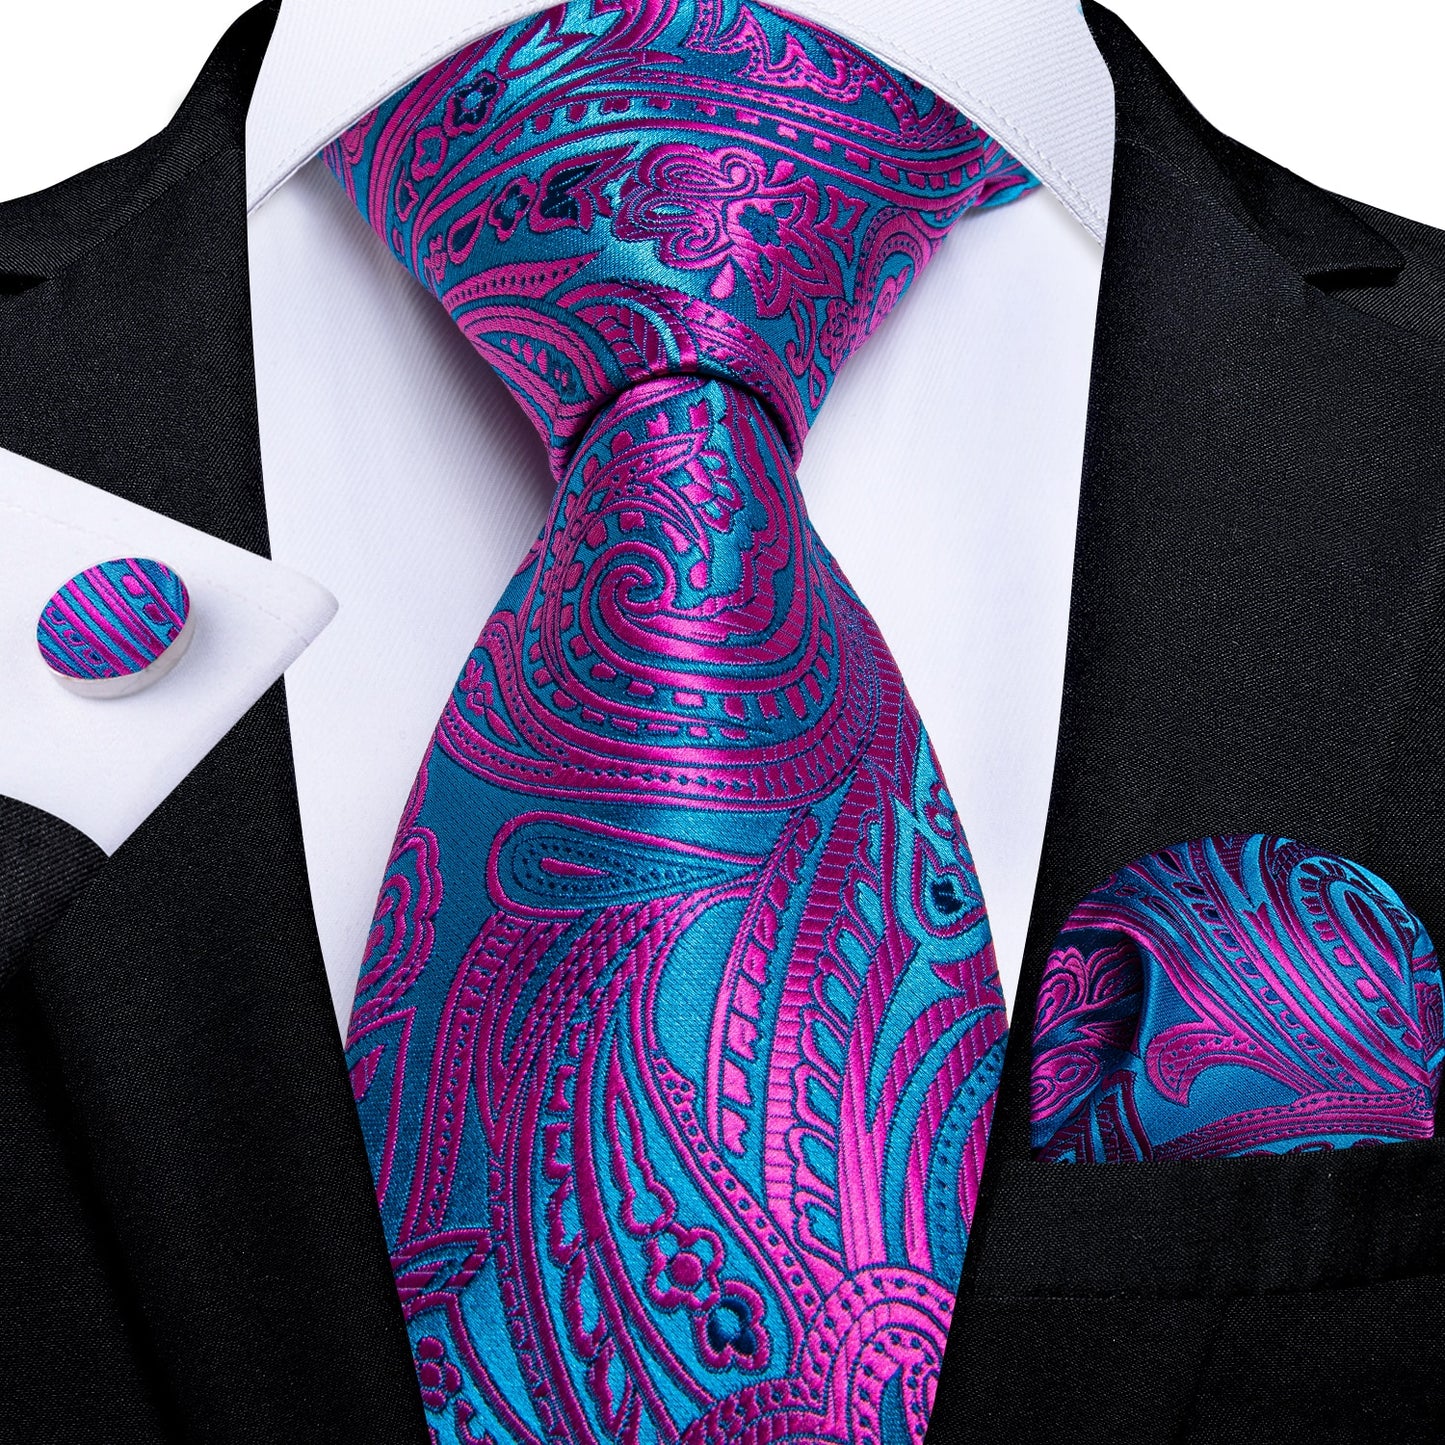 Men Purple Floral Paisley Necktie Business Formal 100% Silk Tie Pocket Square Set For Wedding Party The Clothing Company Sydney